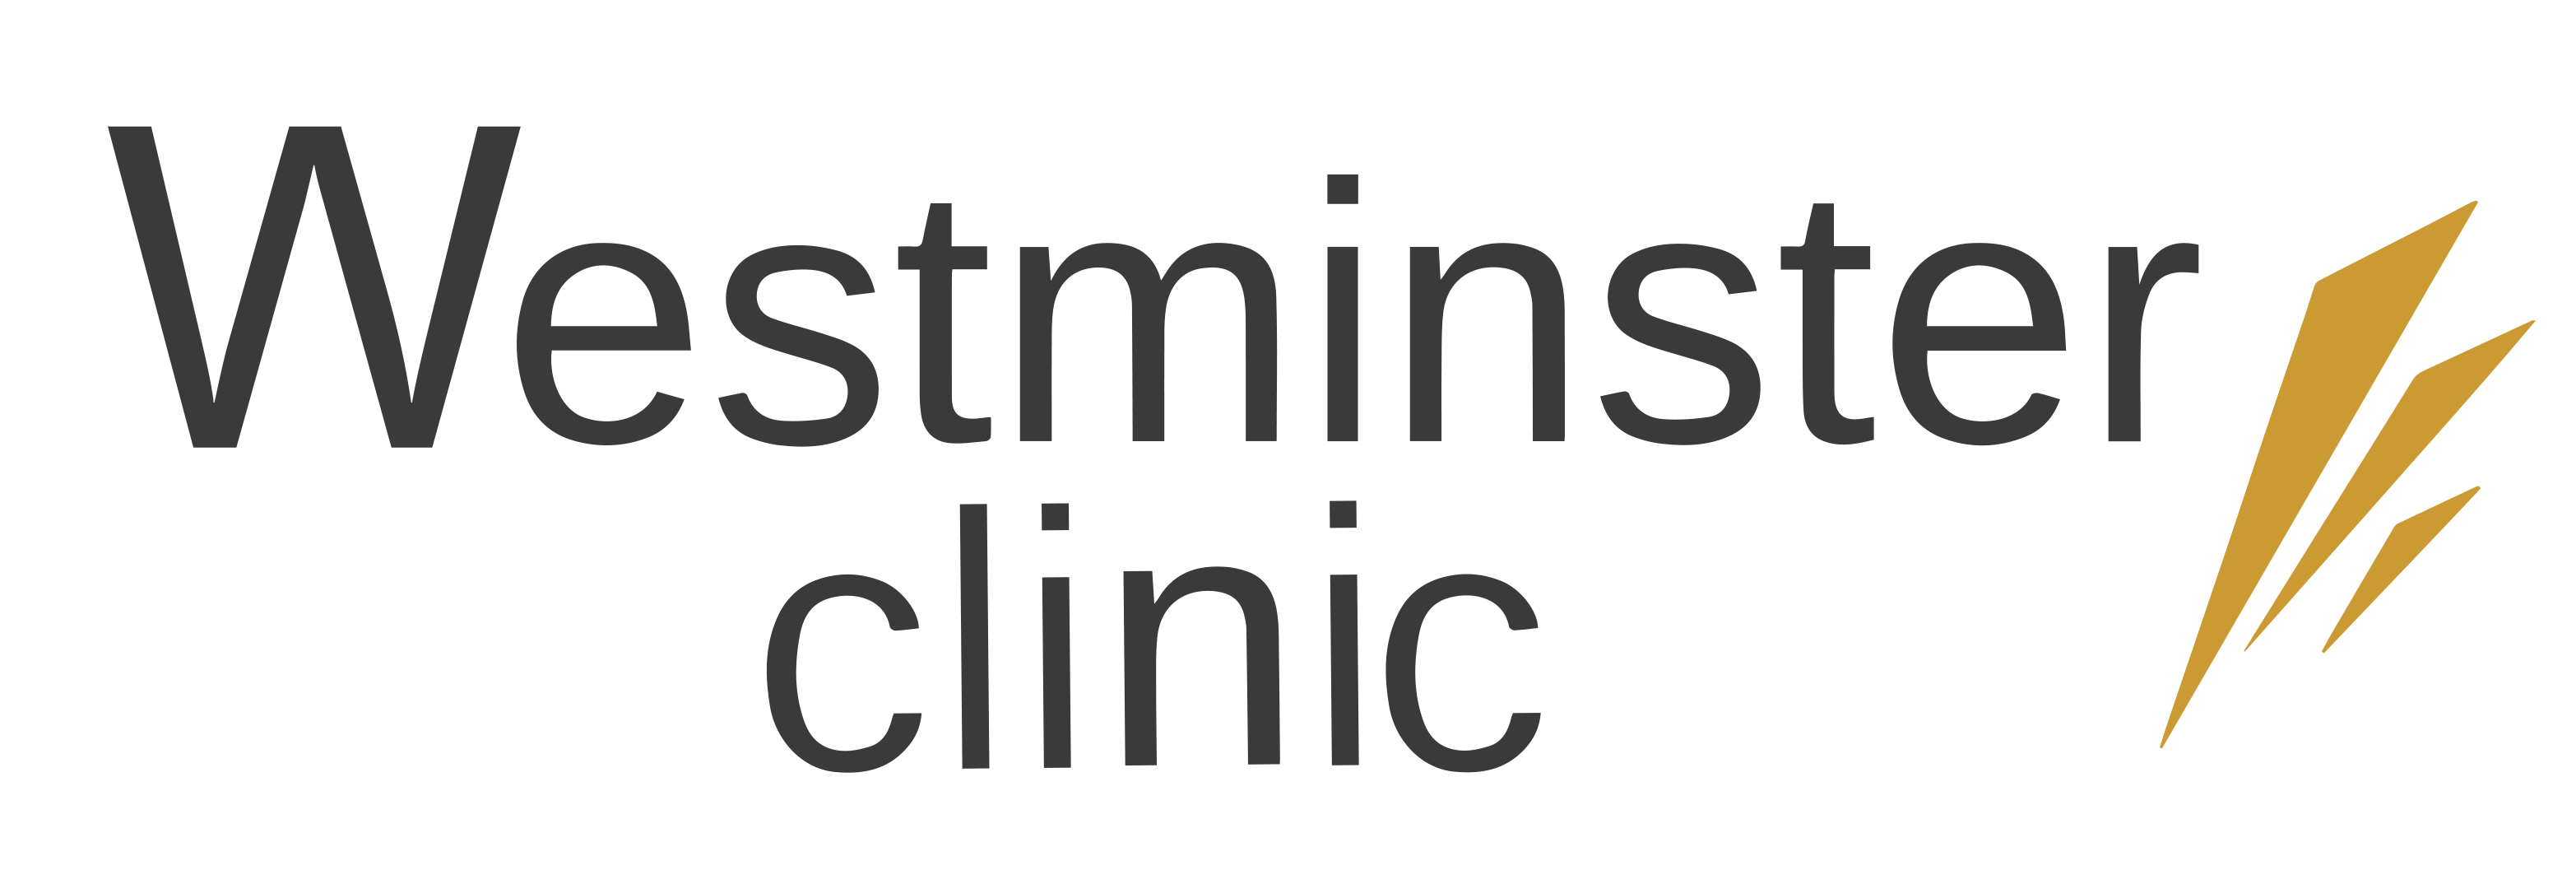 Westminster Clinic